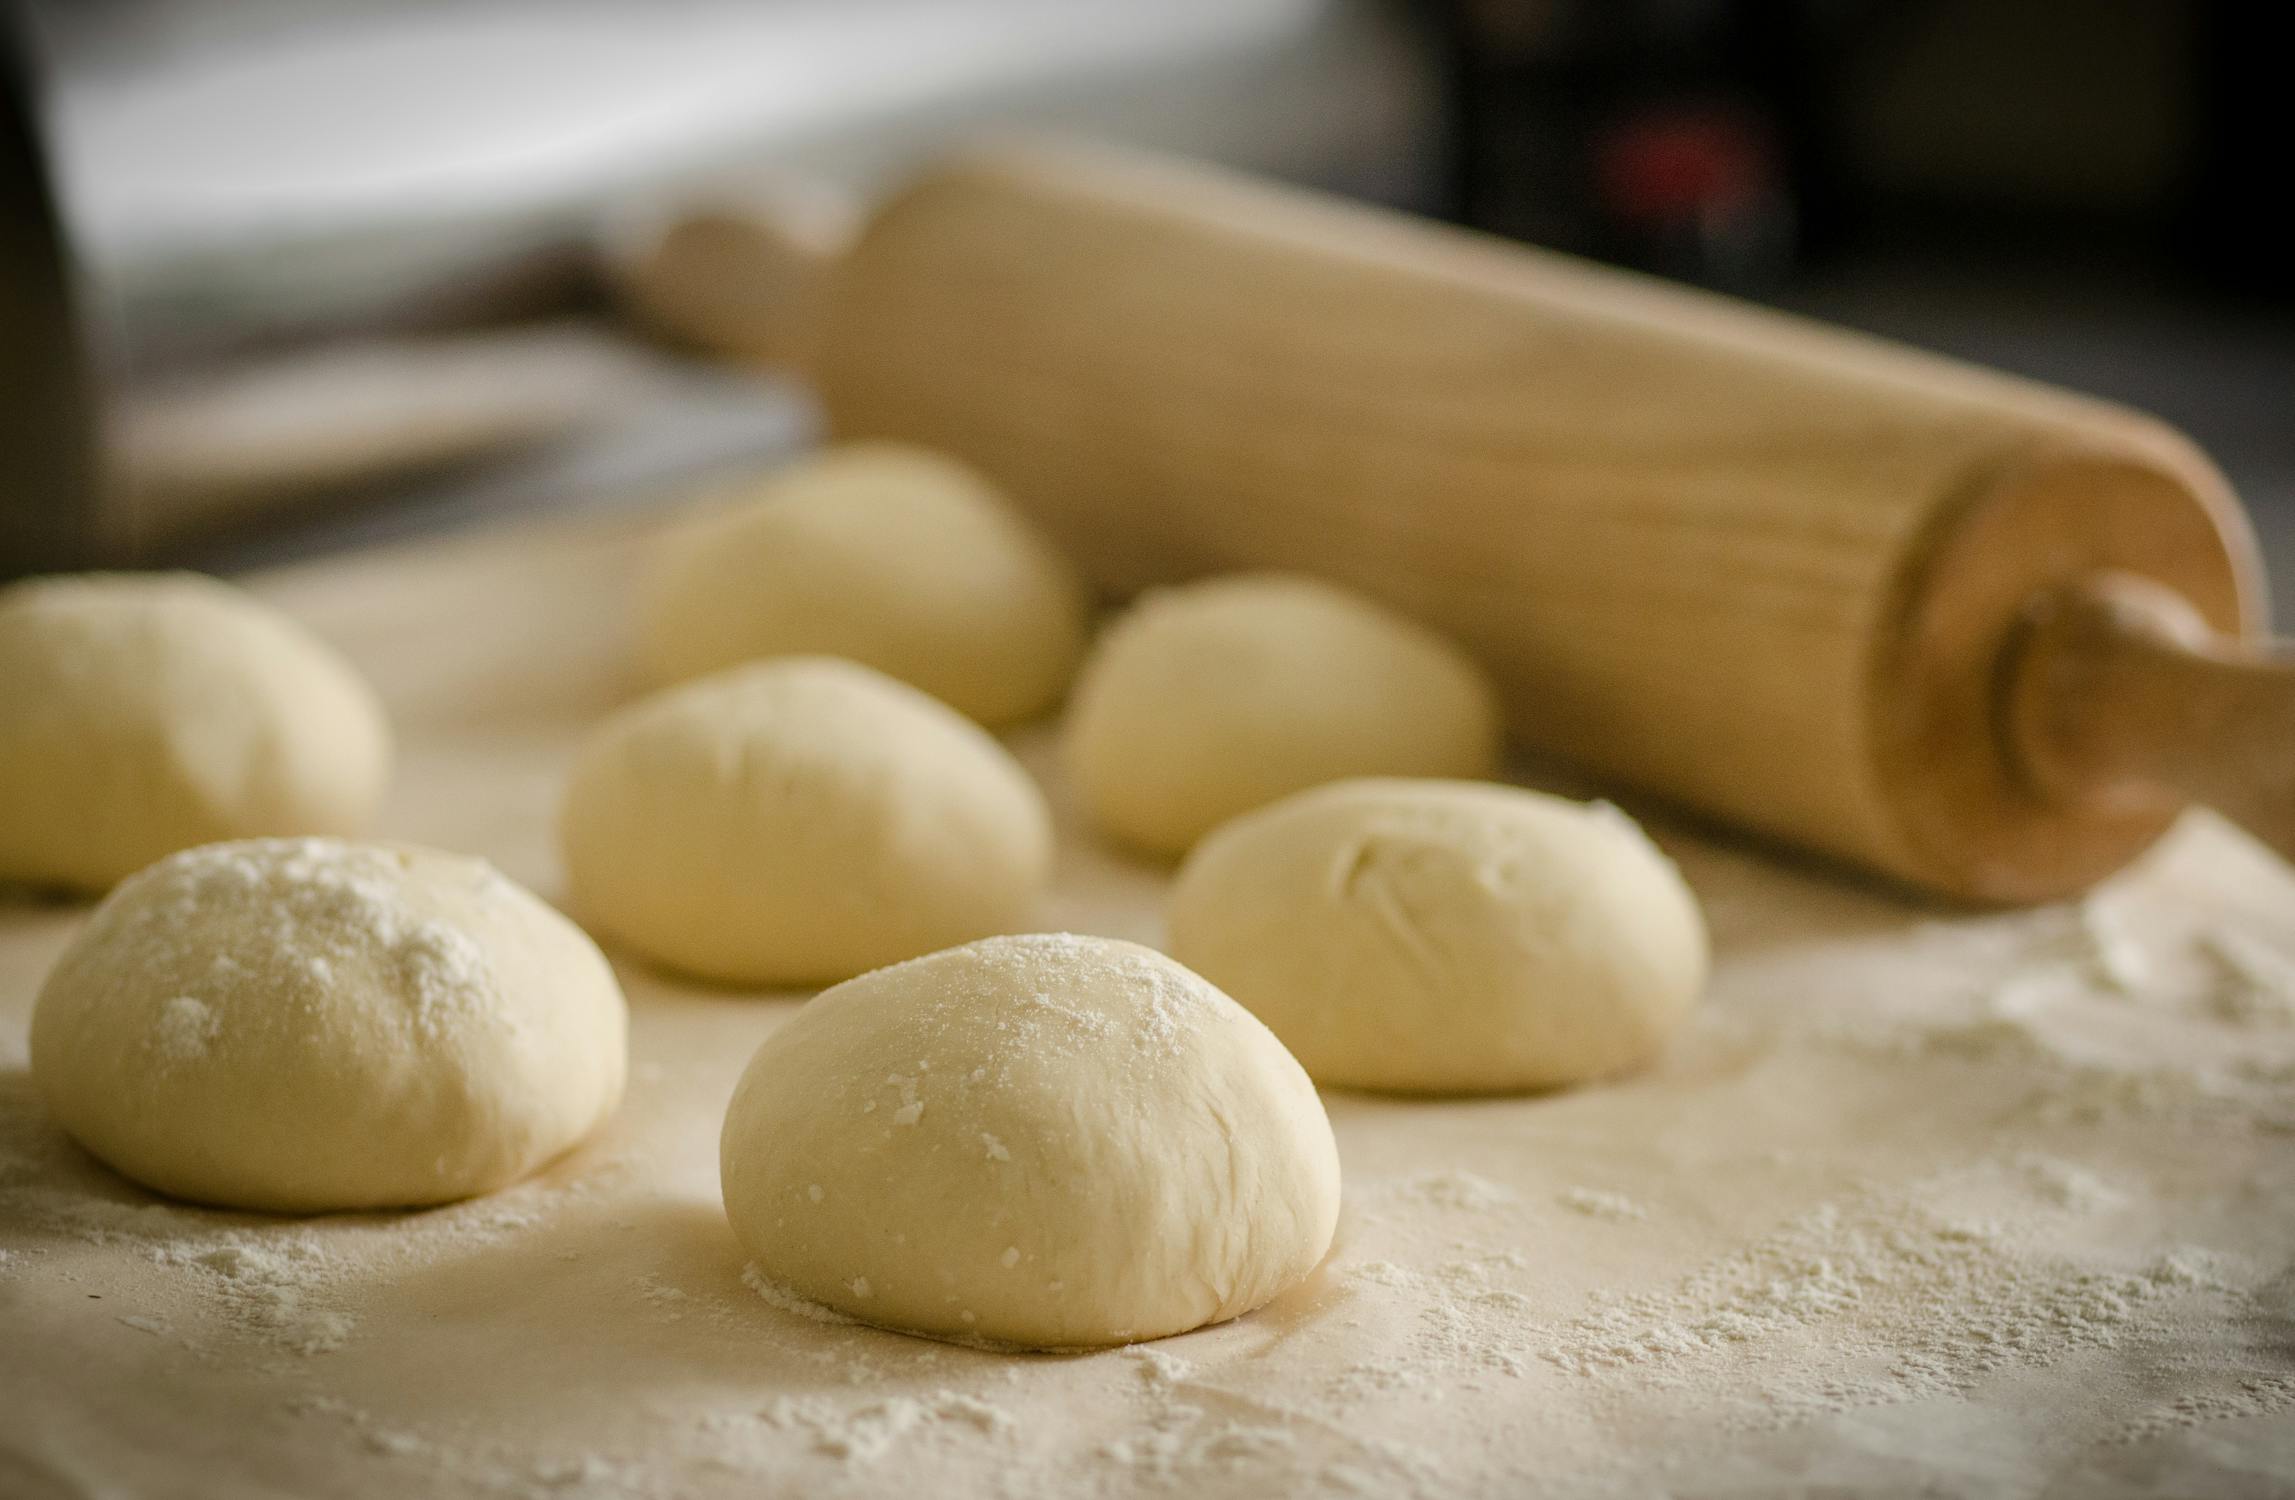 Balls of dough sit on a baking tray with a rolling pin in the background. Photo by Skitterphoto. Used courtesy of Pexels.com.